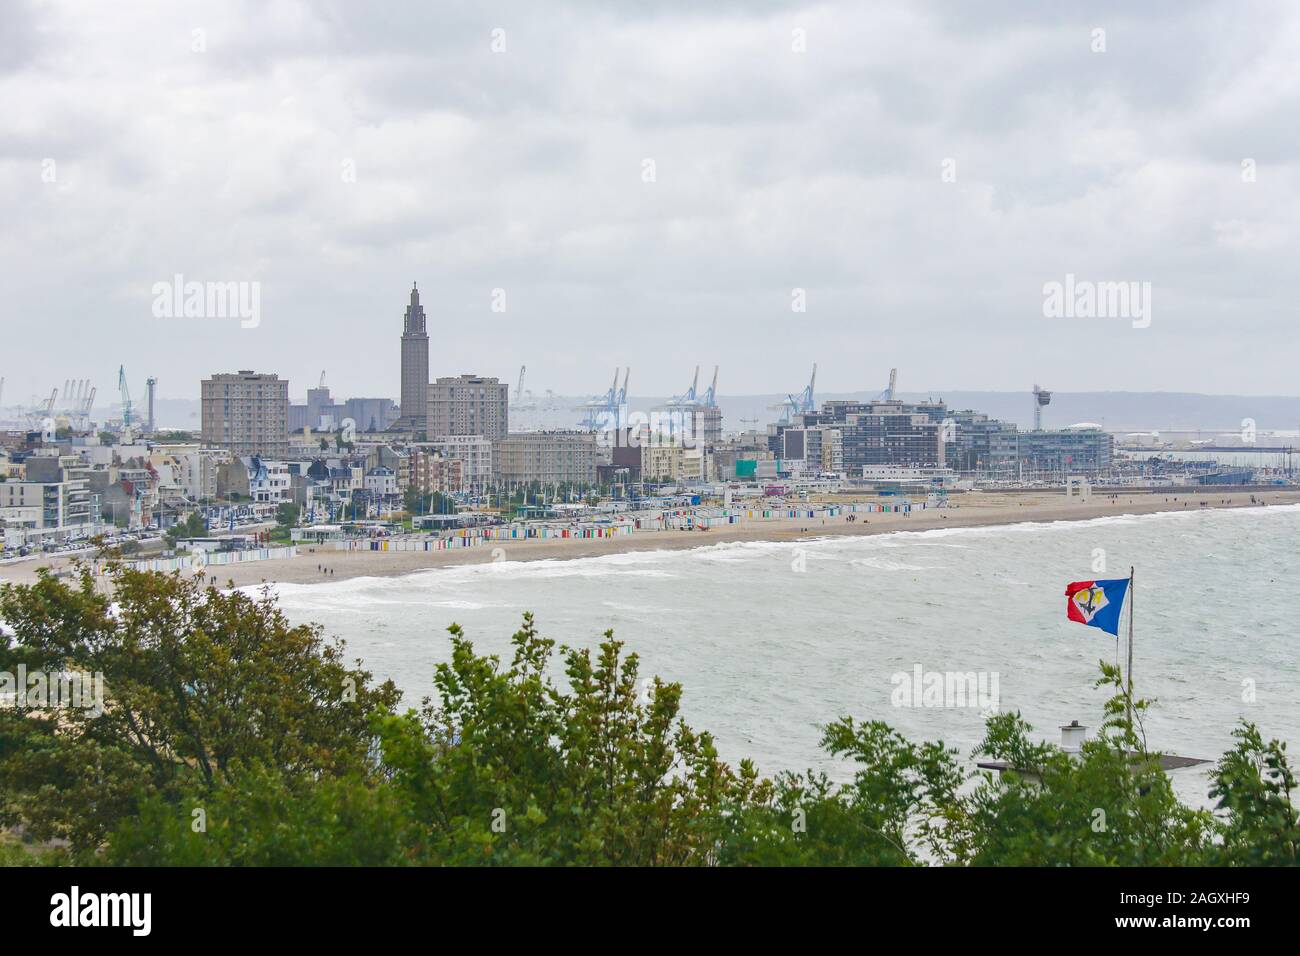 Skyline of the port and city center of Le Havre, Seine-Maritime, Normandy, France. Stock Photo